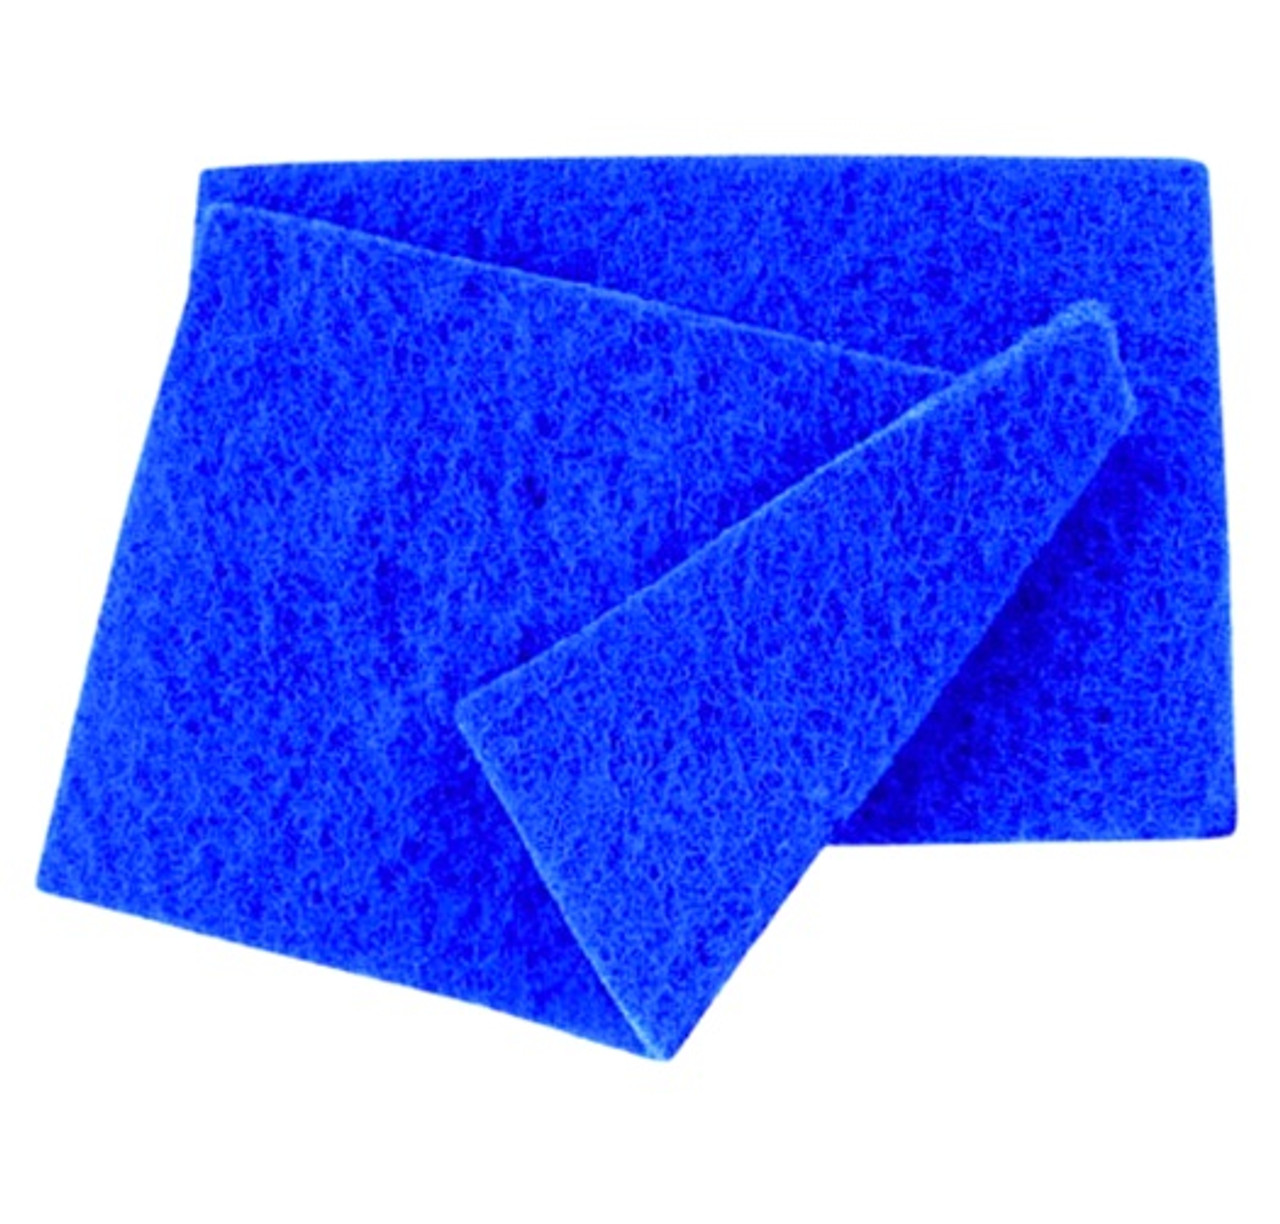 Extra Large Heavy Duty Blue Catering Kitchen Scouring Pads 23cm x 15cm - Pack x 10 